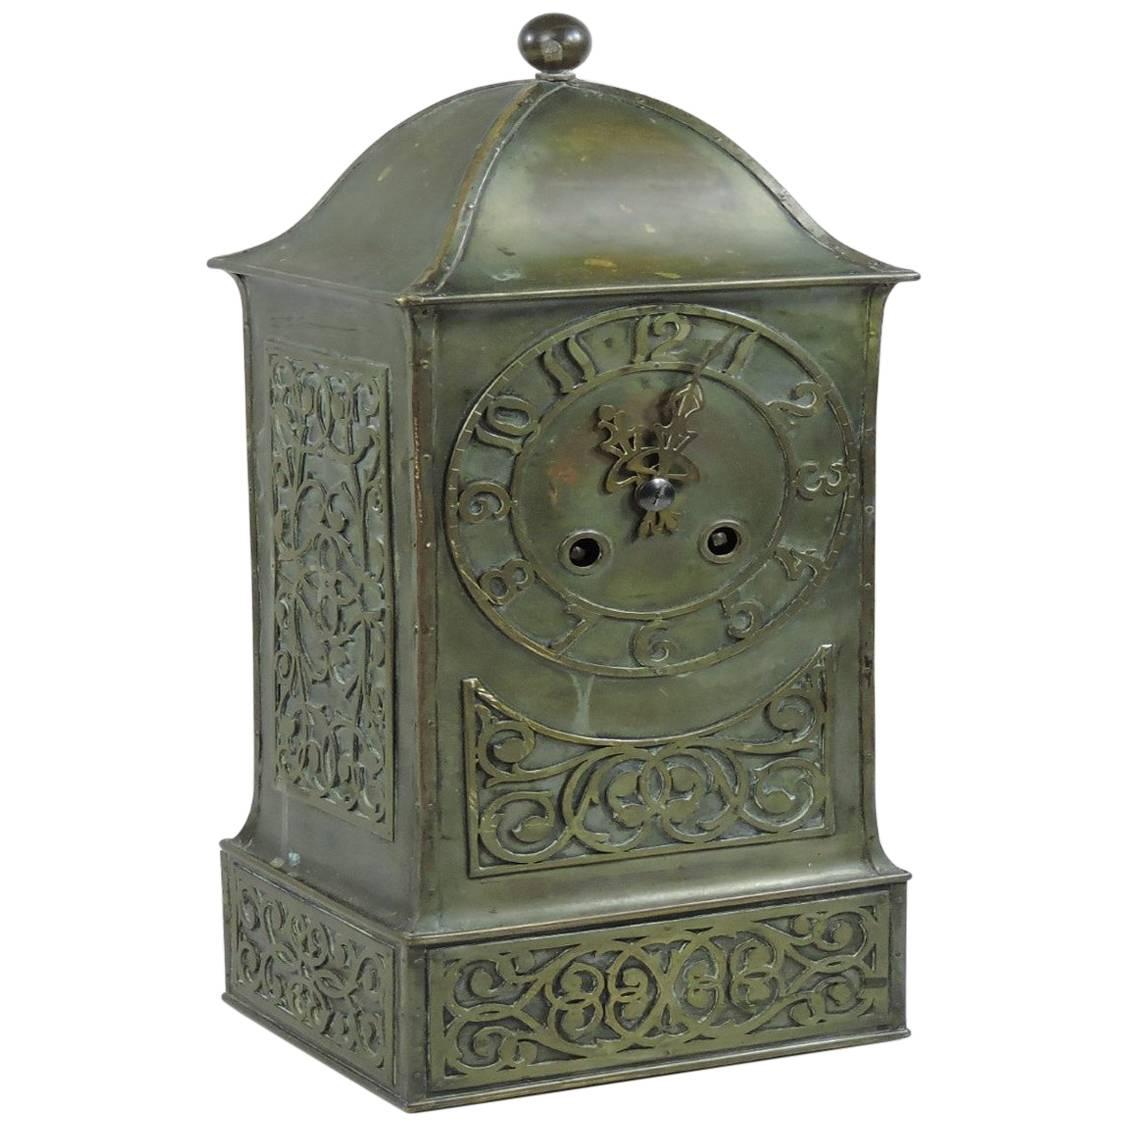 B G H, Attri an Arts & Crafts Brass Mantel Clock with Stylised Floral Chasing